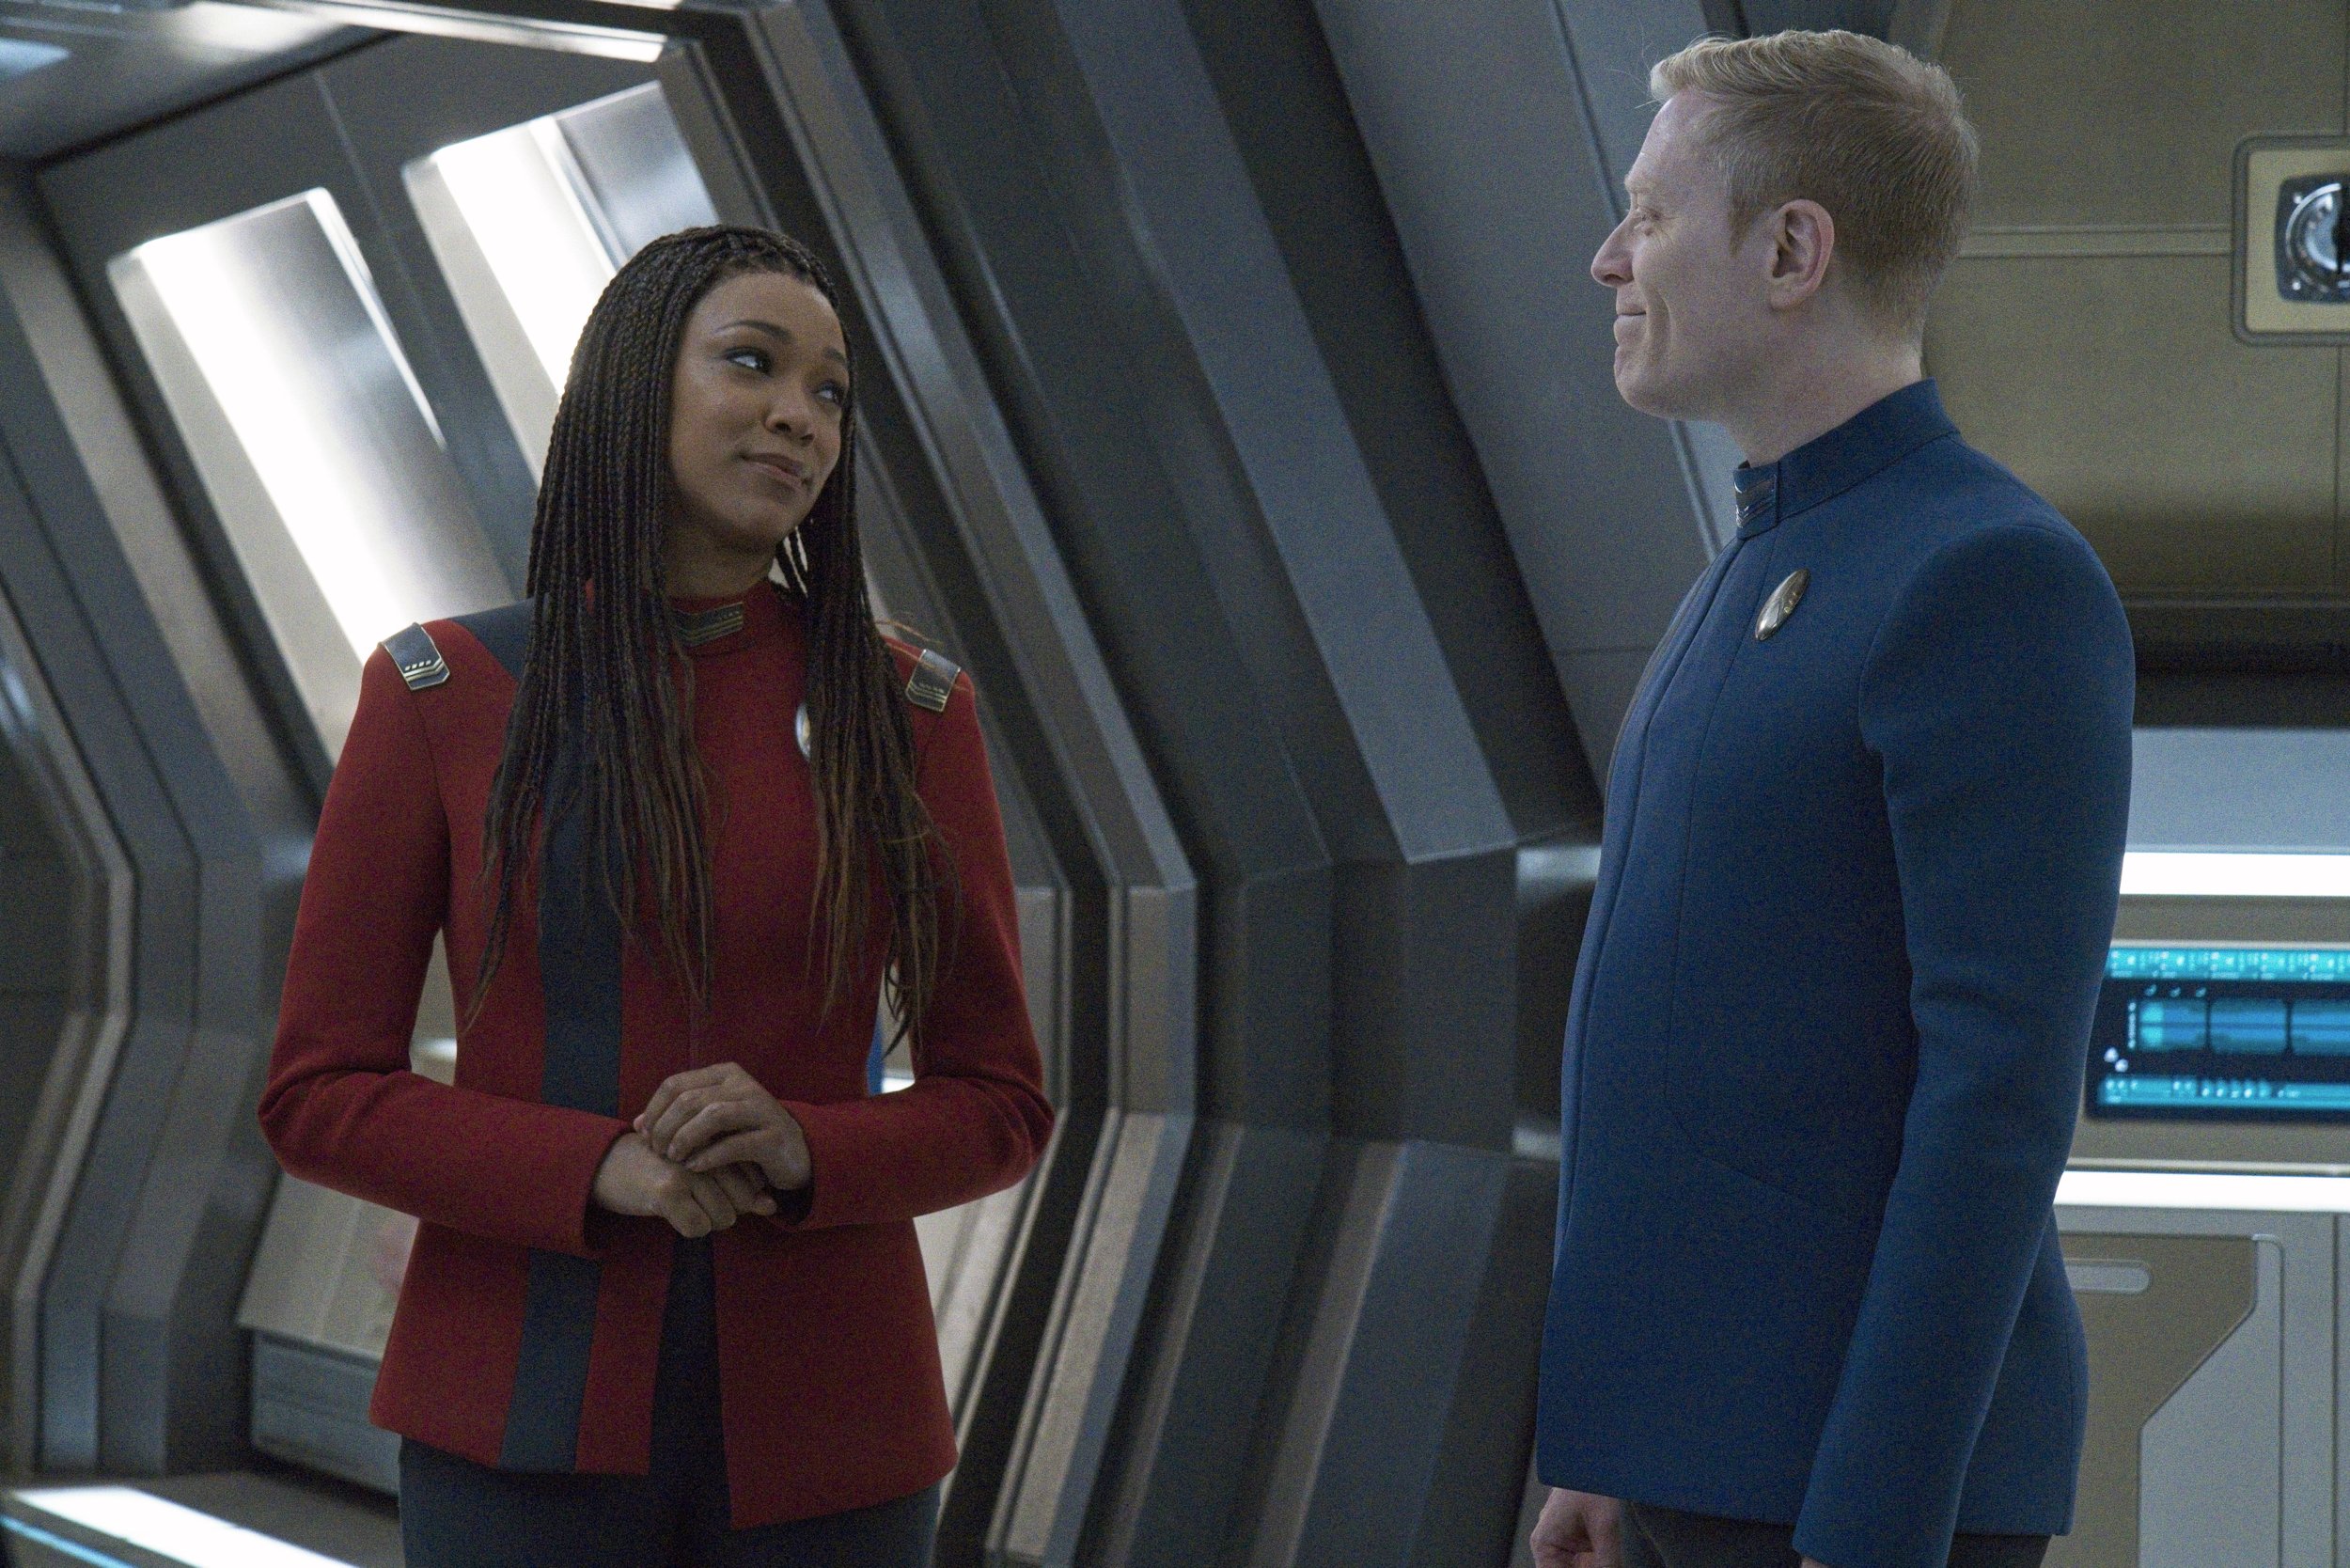   Pictured: Sonequa Martin Green as Burnham and Anthony Rapp as Stamets of the Paramount+ original series STAR TREK: DISCOVERY. Photo Cr: Michael Gibson/Paramount+ (C) 2021 CBS Interactive. All Rights Reserved.  